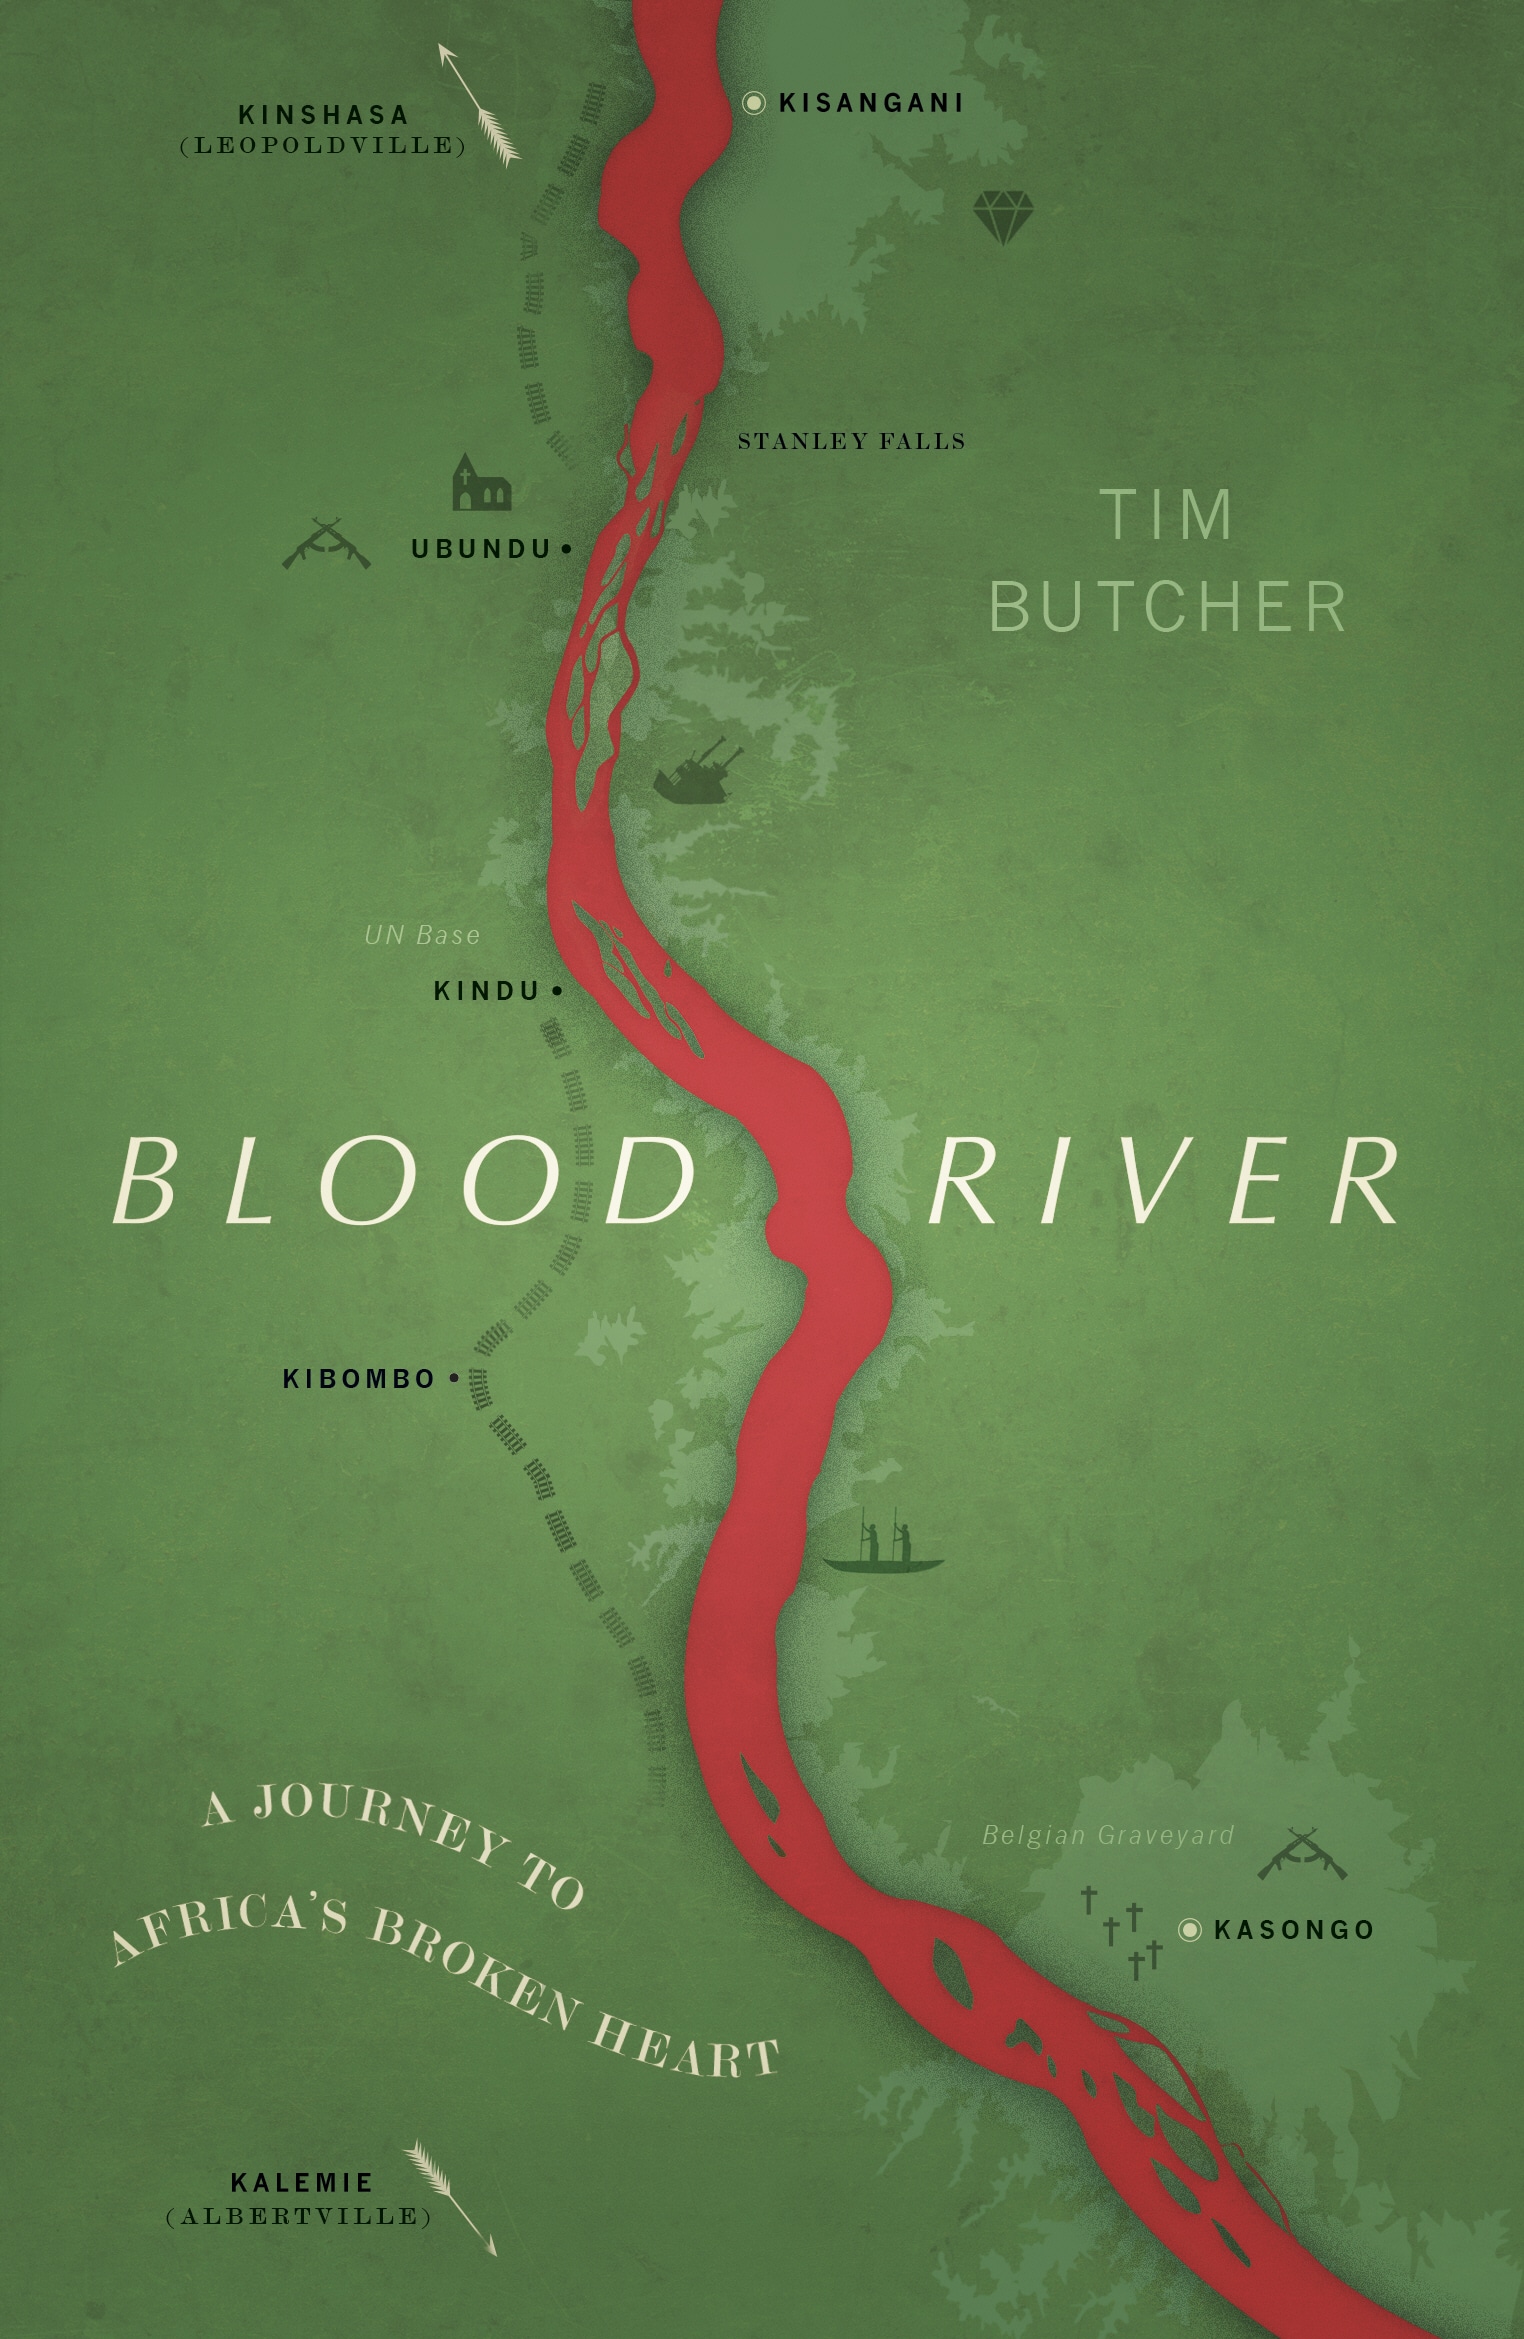 Book “Blood River” by Tim Butcher — June 6, 2019